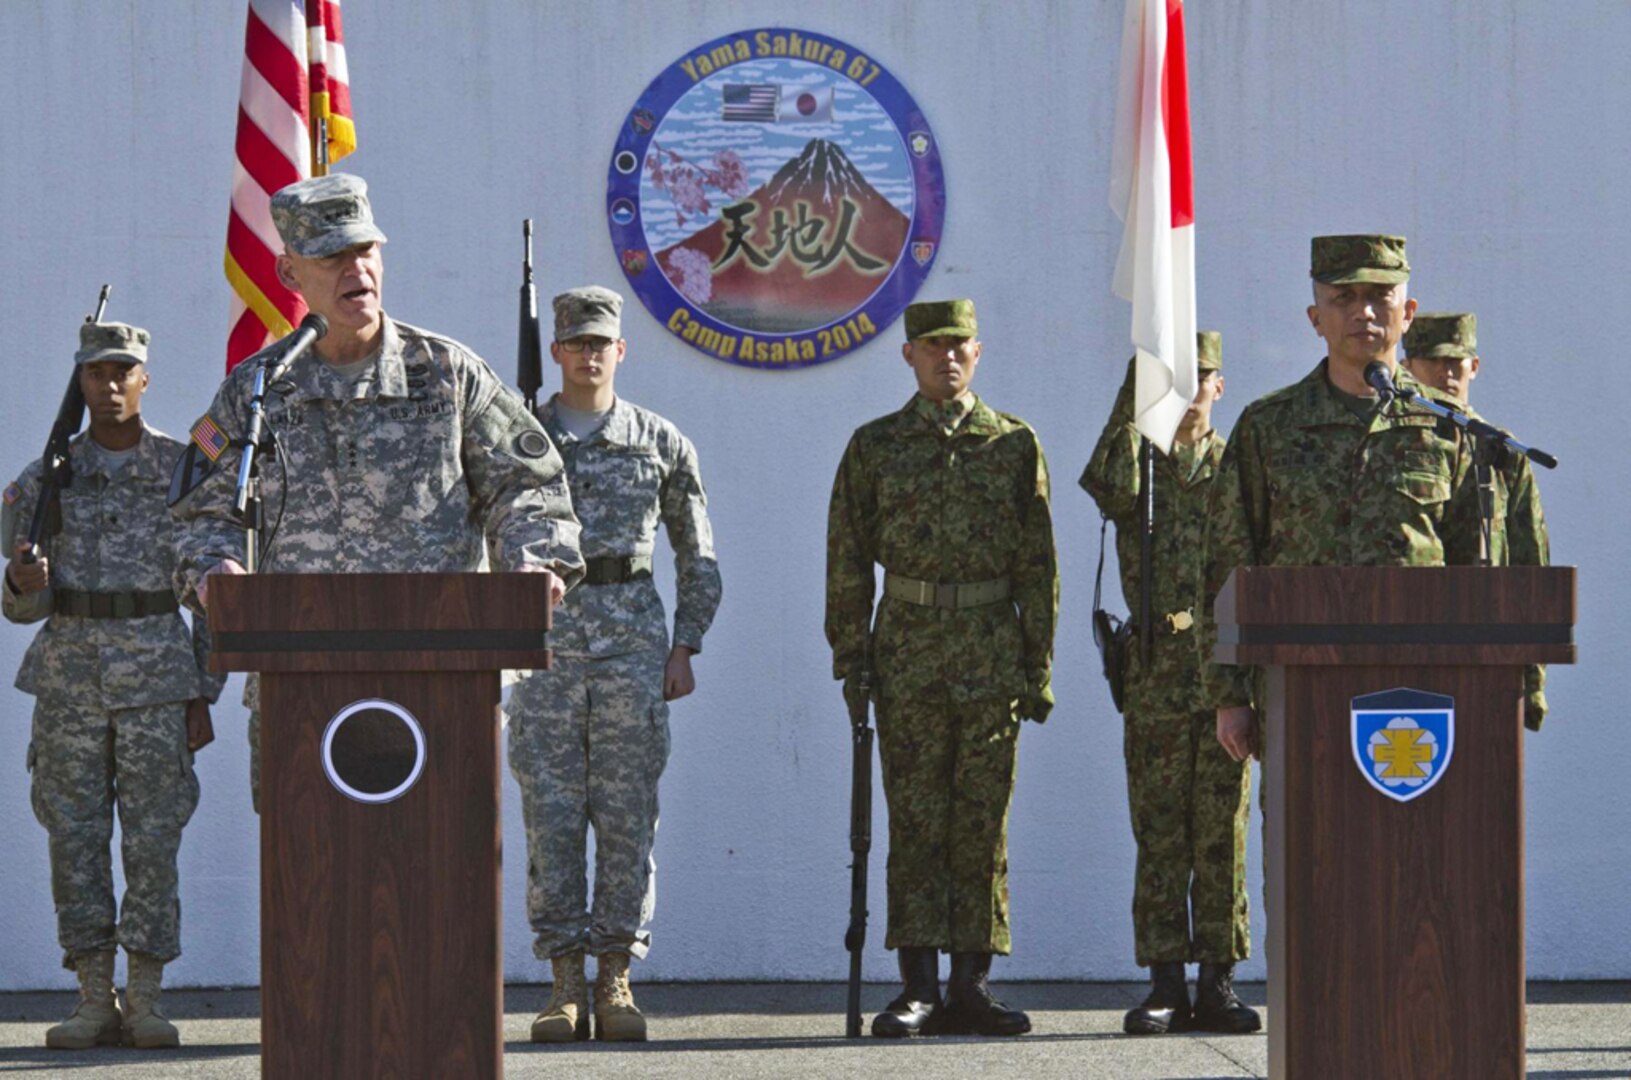 CAMP ASAKA, Japan (Dec. 8, 2014) - Lt. Gen. Stephen R. Lanza, I Corps commanding general, speaks during the opening ceremony for Yama Sakura 67 on Camp Asaka.  Yama Sakura is an annual bi-lateral command post exercise between Japan and the U.S. 